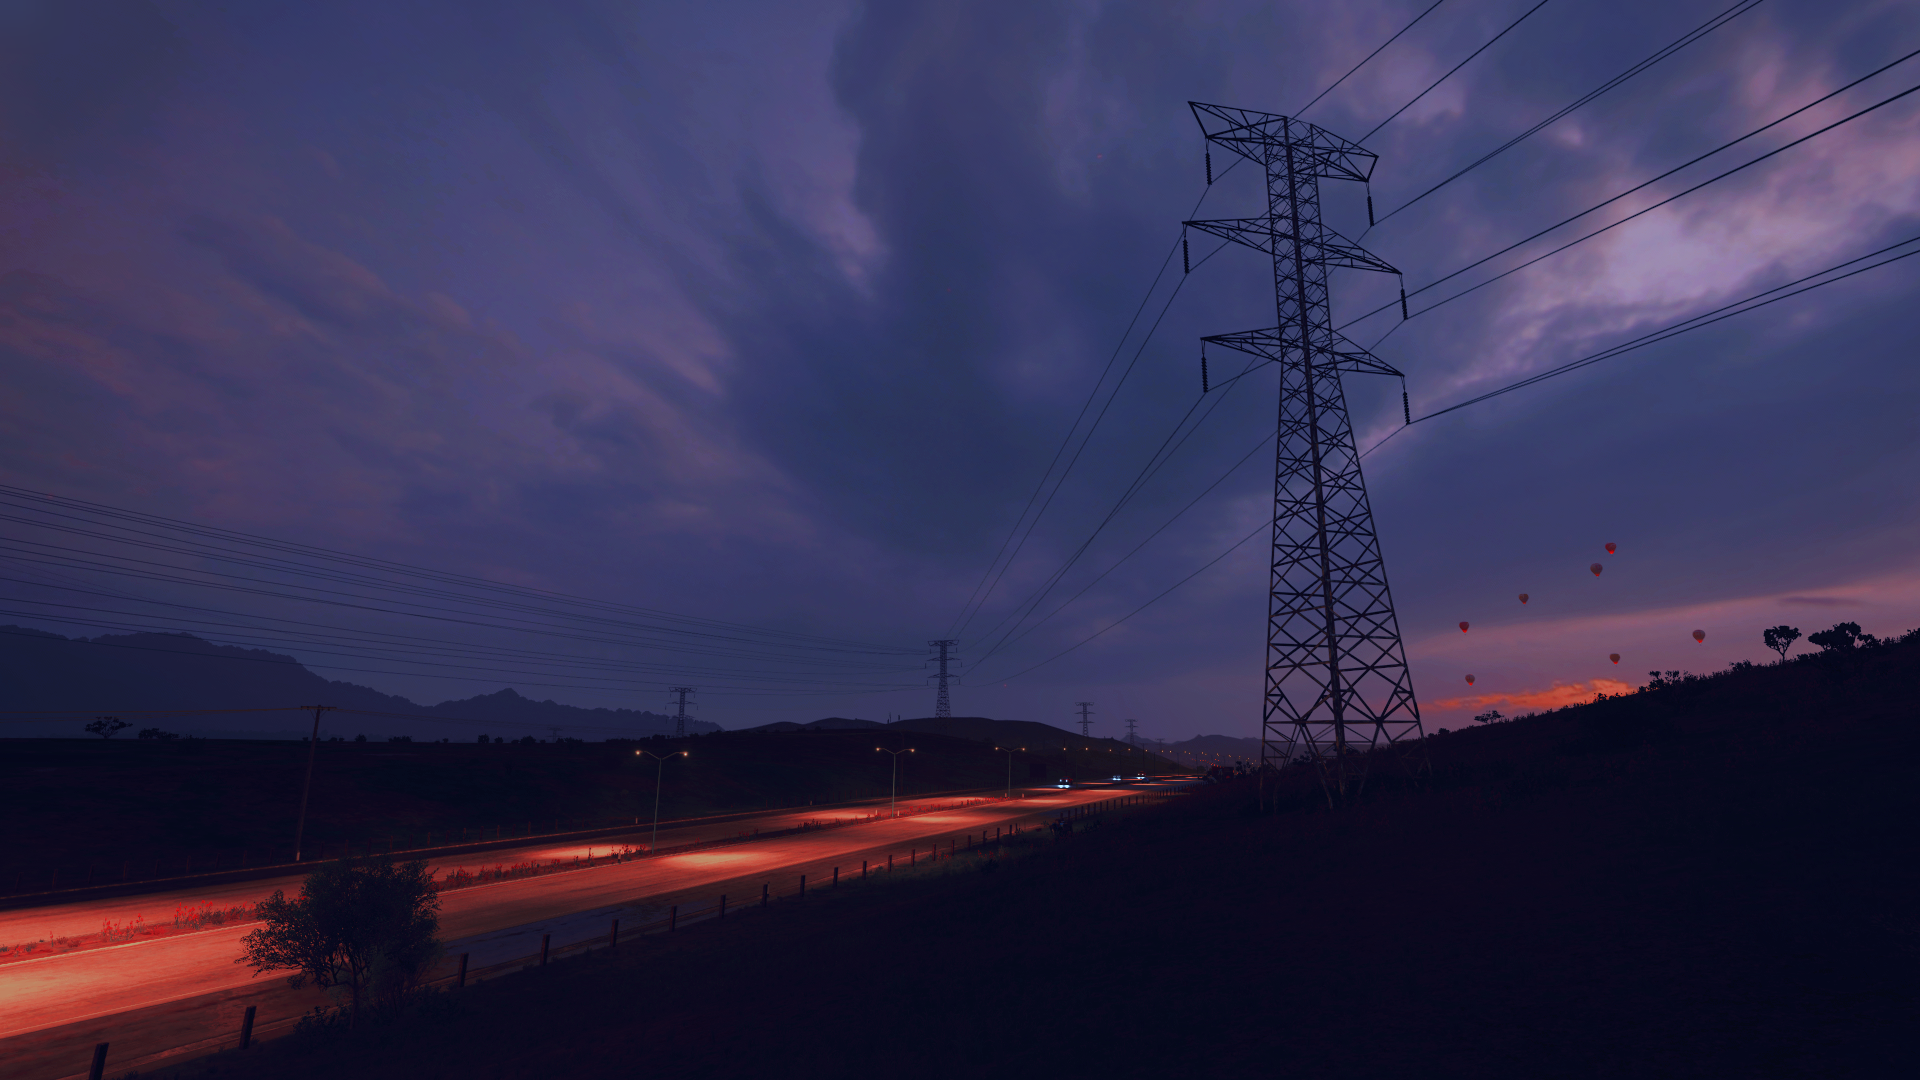 Video Games Forza Forza Horizon 5 Sky Clouds Utility Pole Road Landscape Dark Night Red Blue 1920x1080